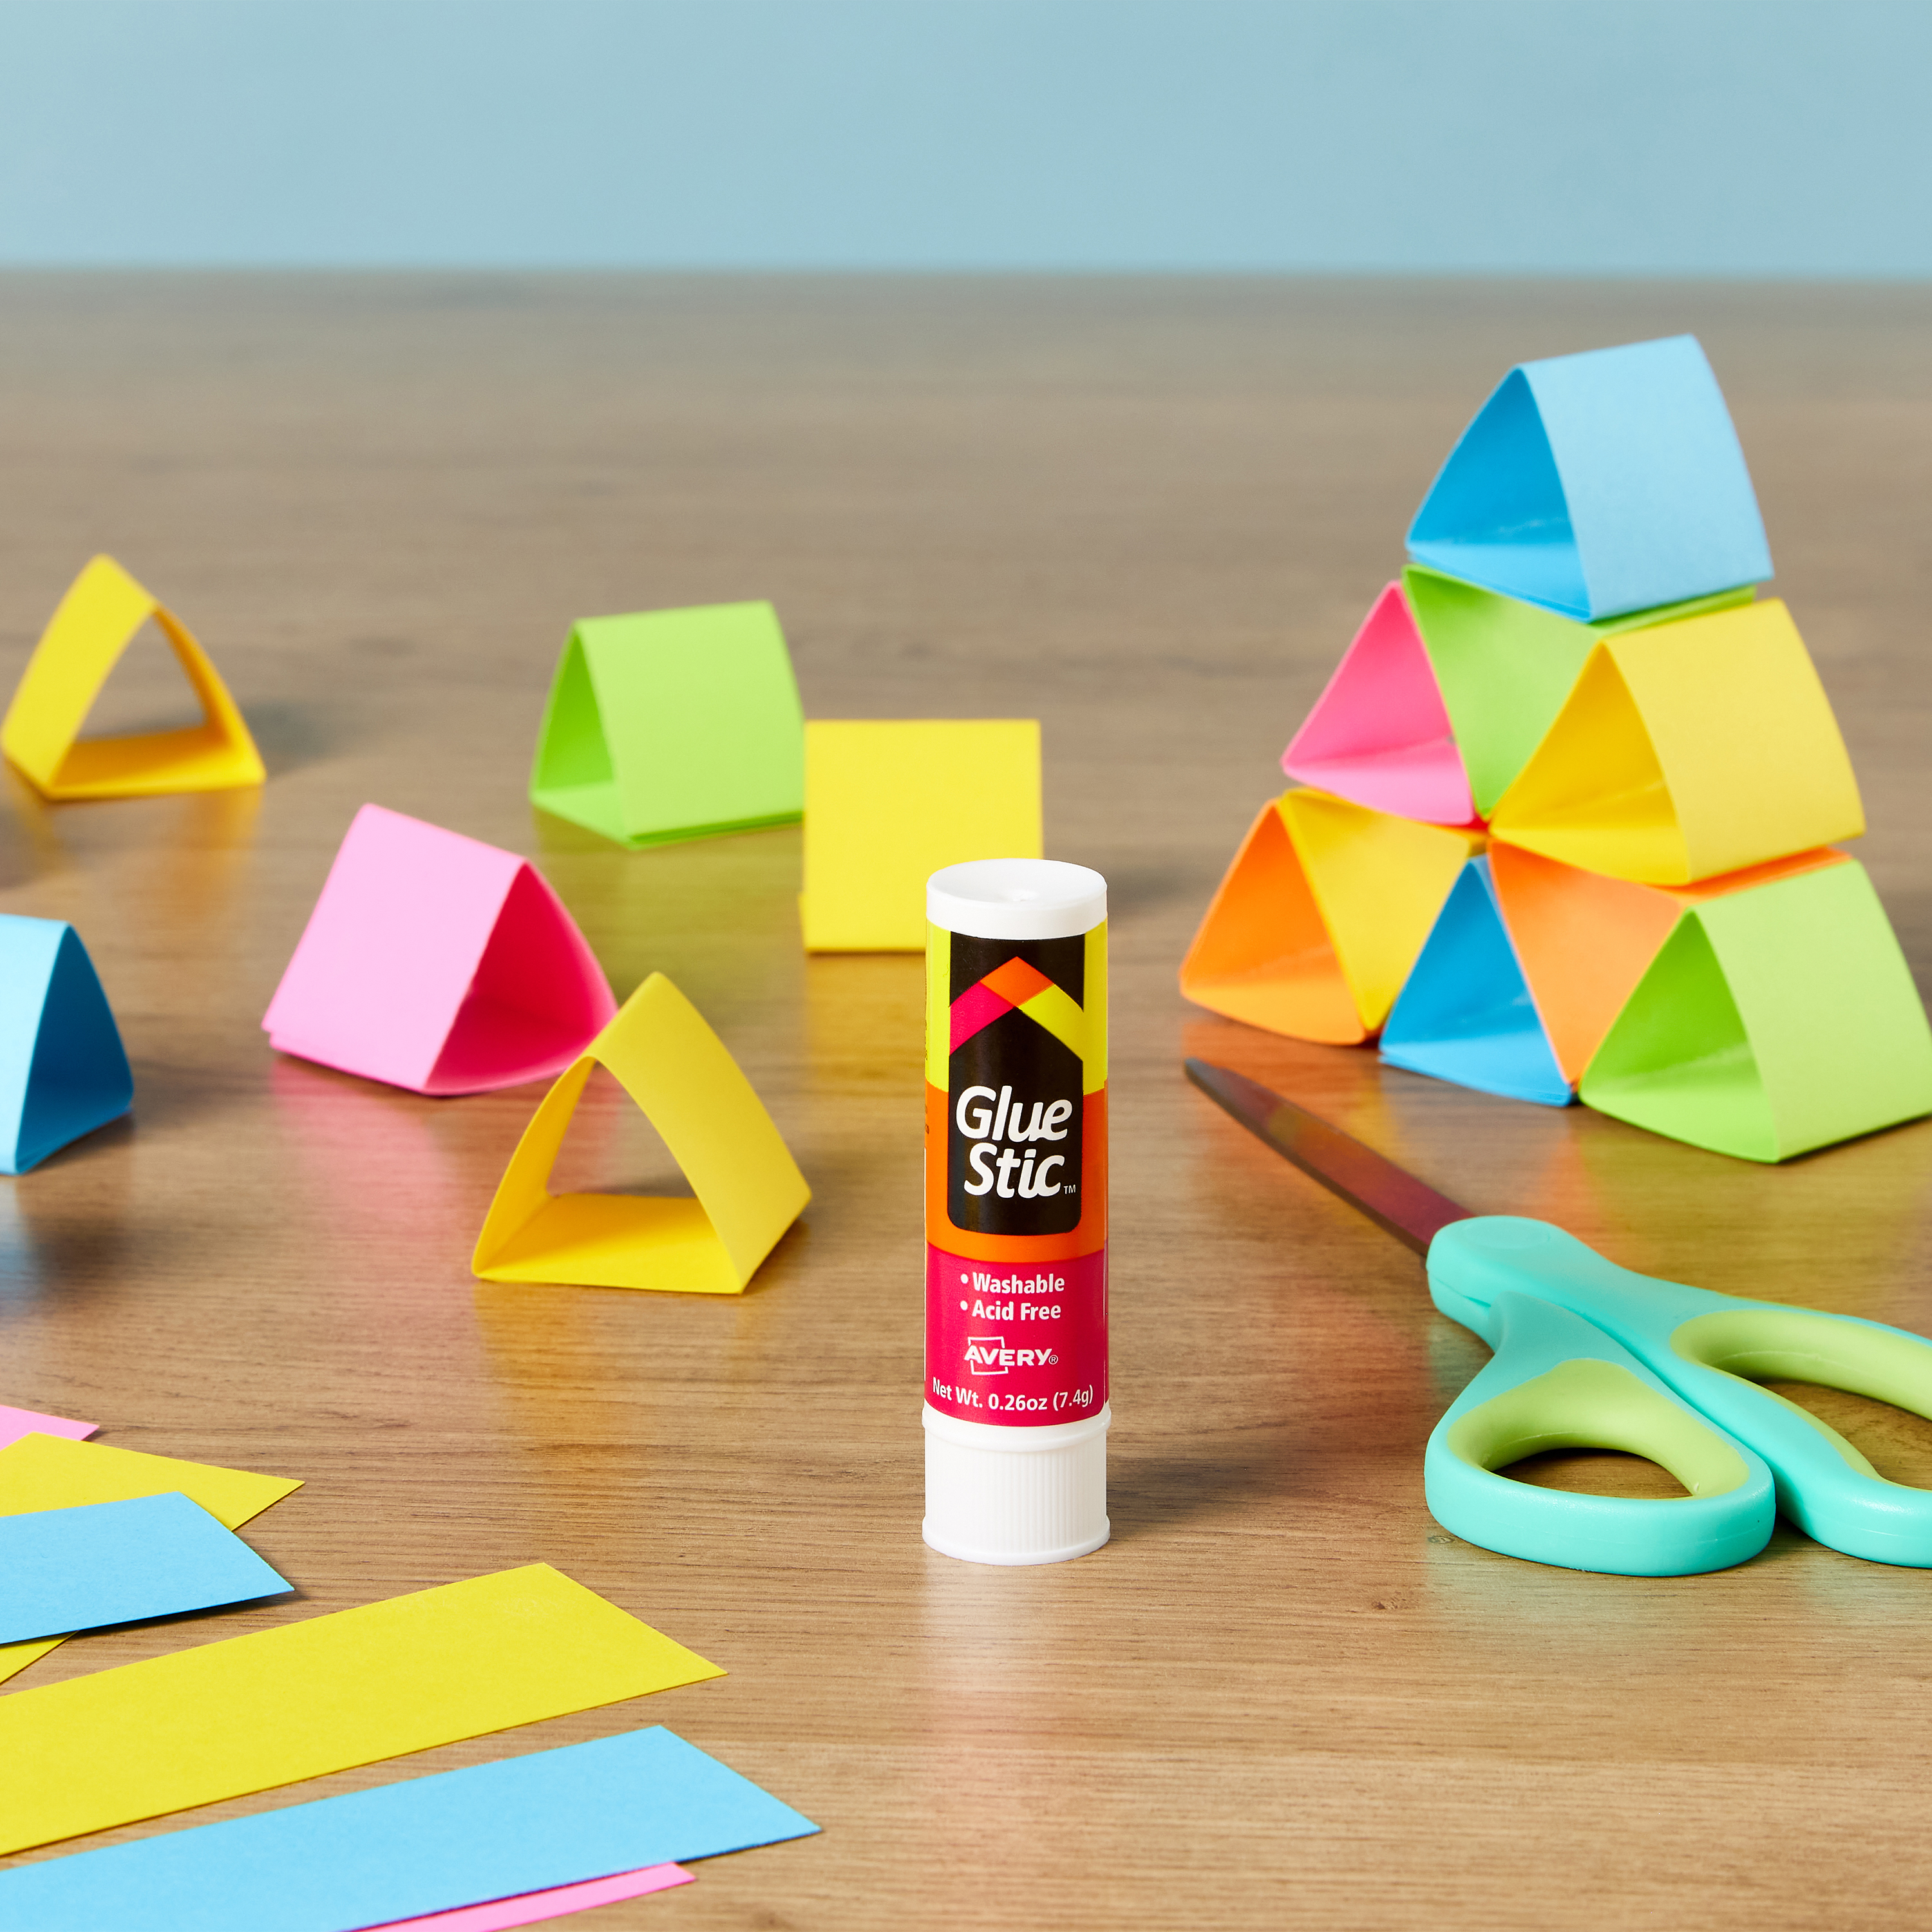 An image showing pieces of construction paper folded and glued together to create triangles that are used for building and spatial play. In the center of the image is Avery 00171 Glue Stic.